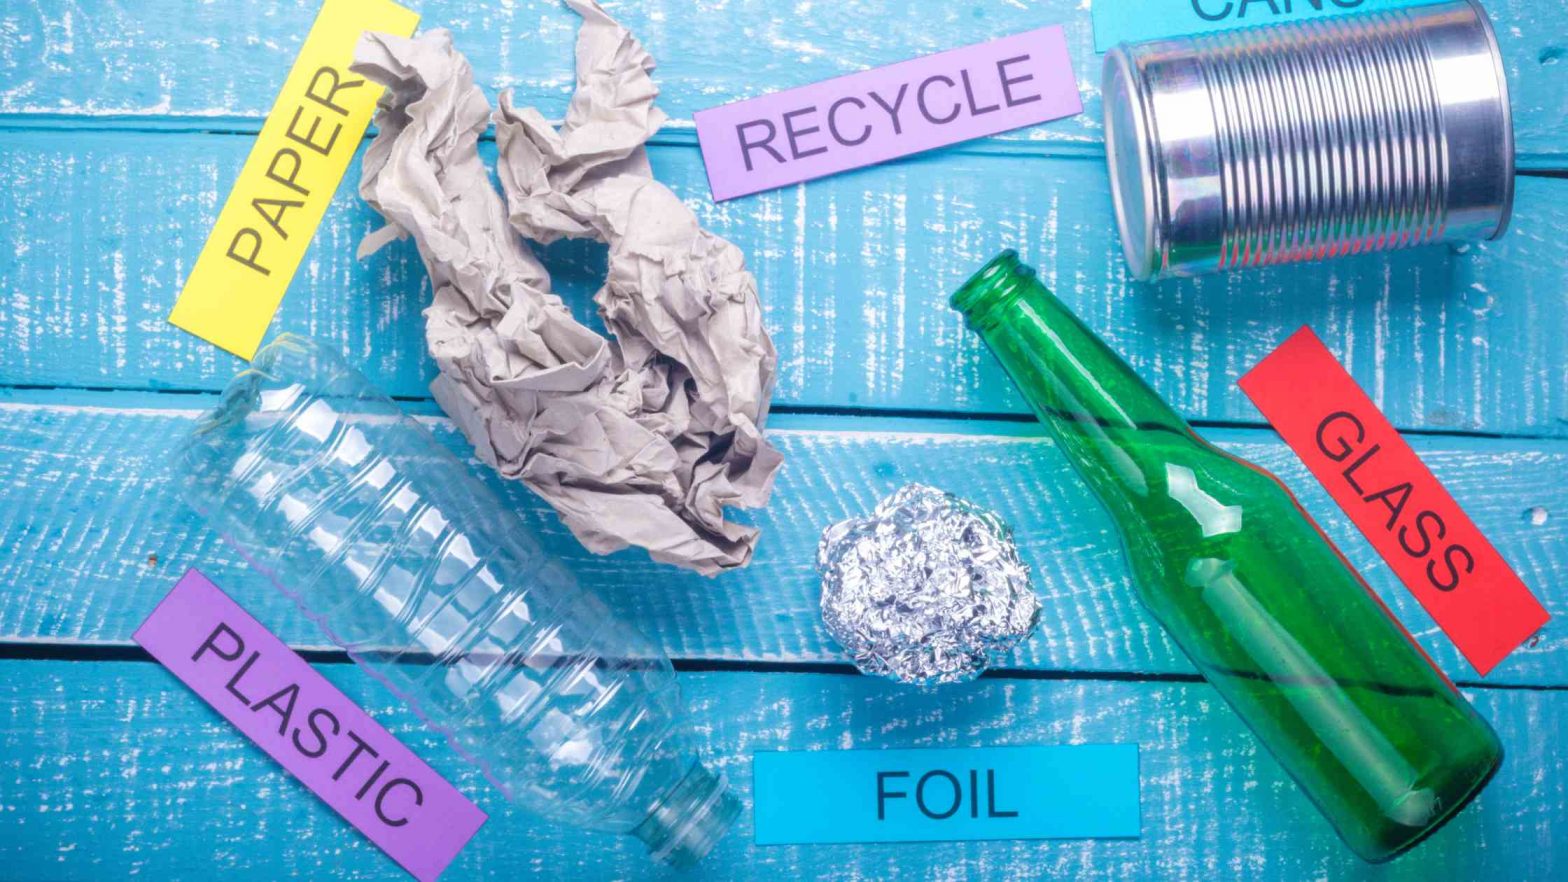 Why Should You Care About Recycling Waste